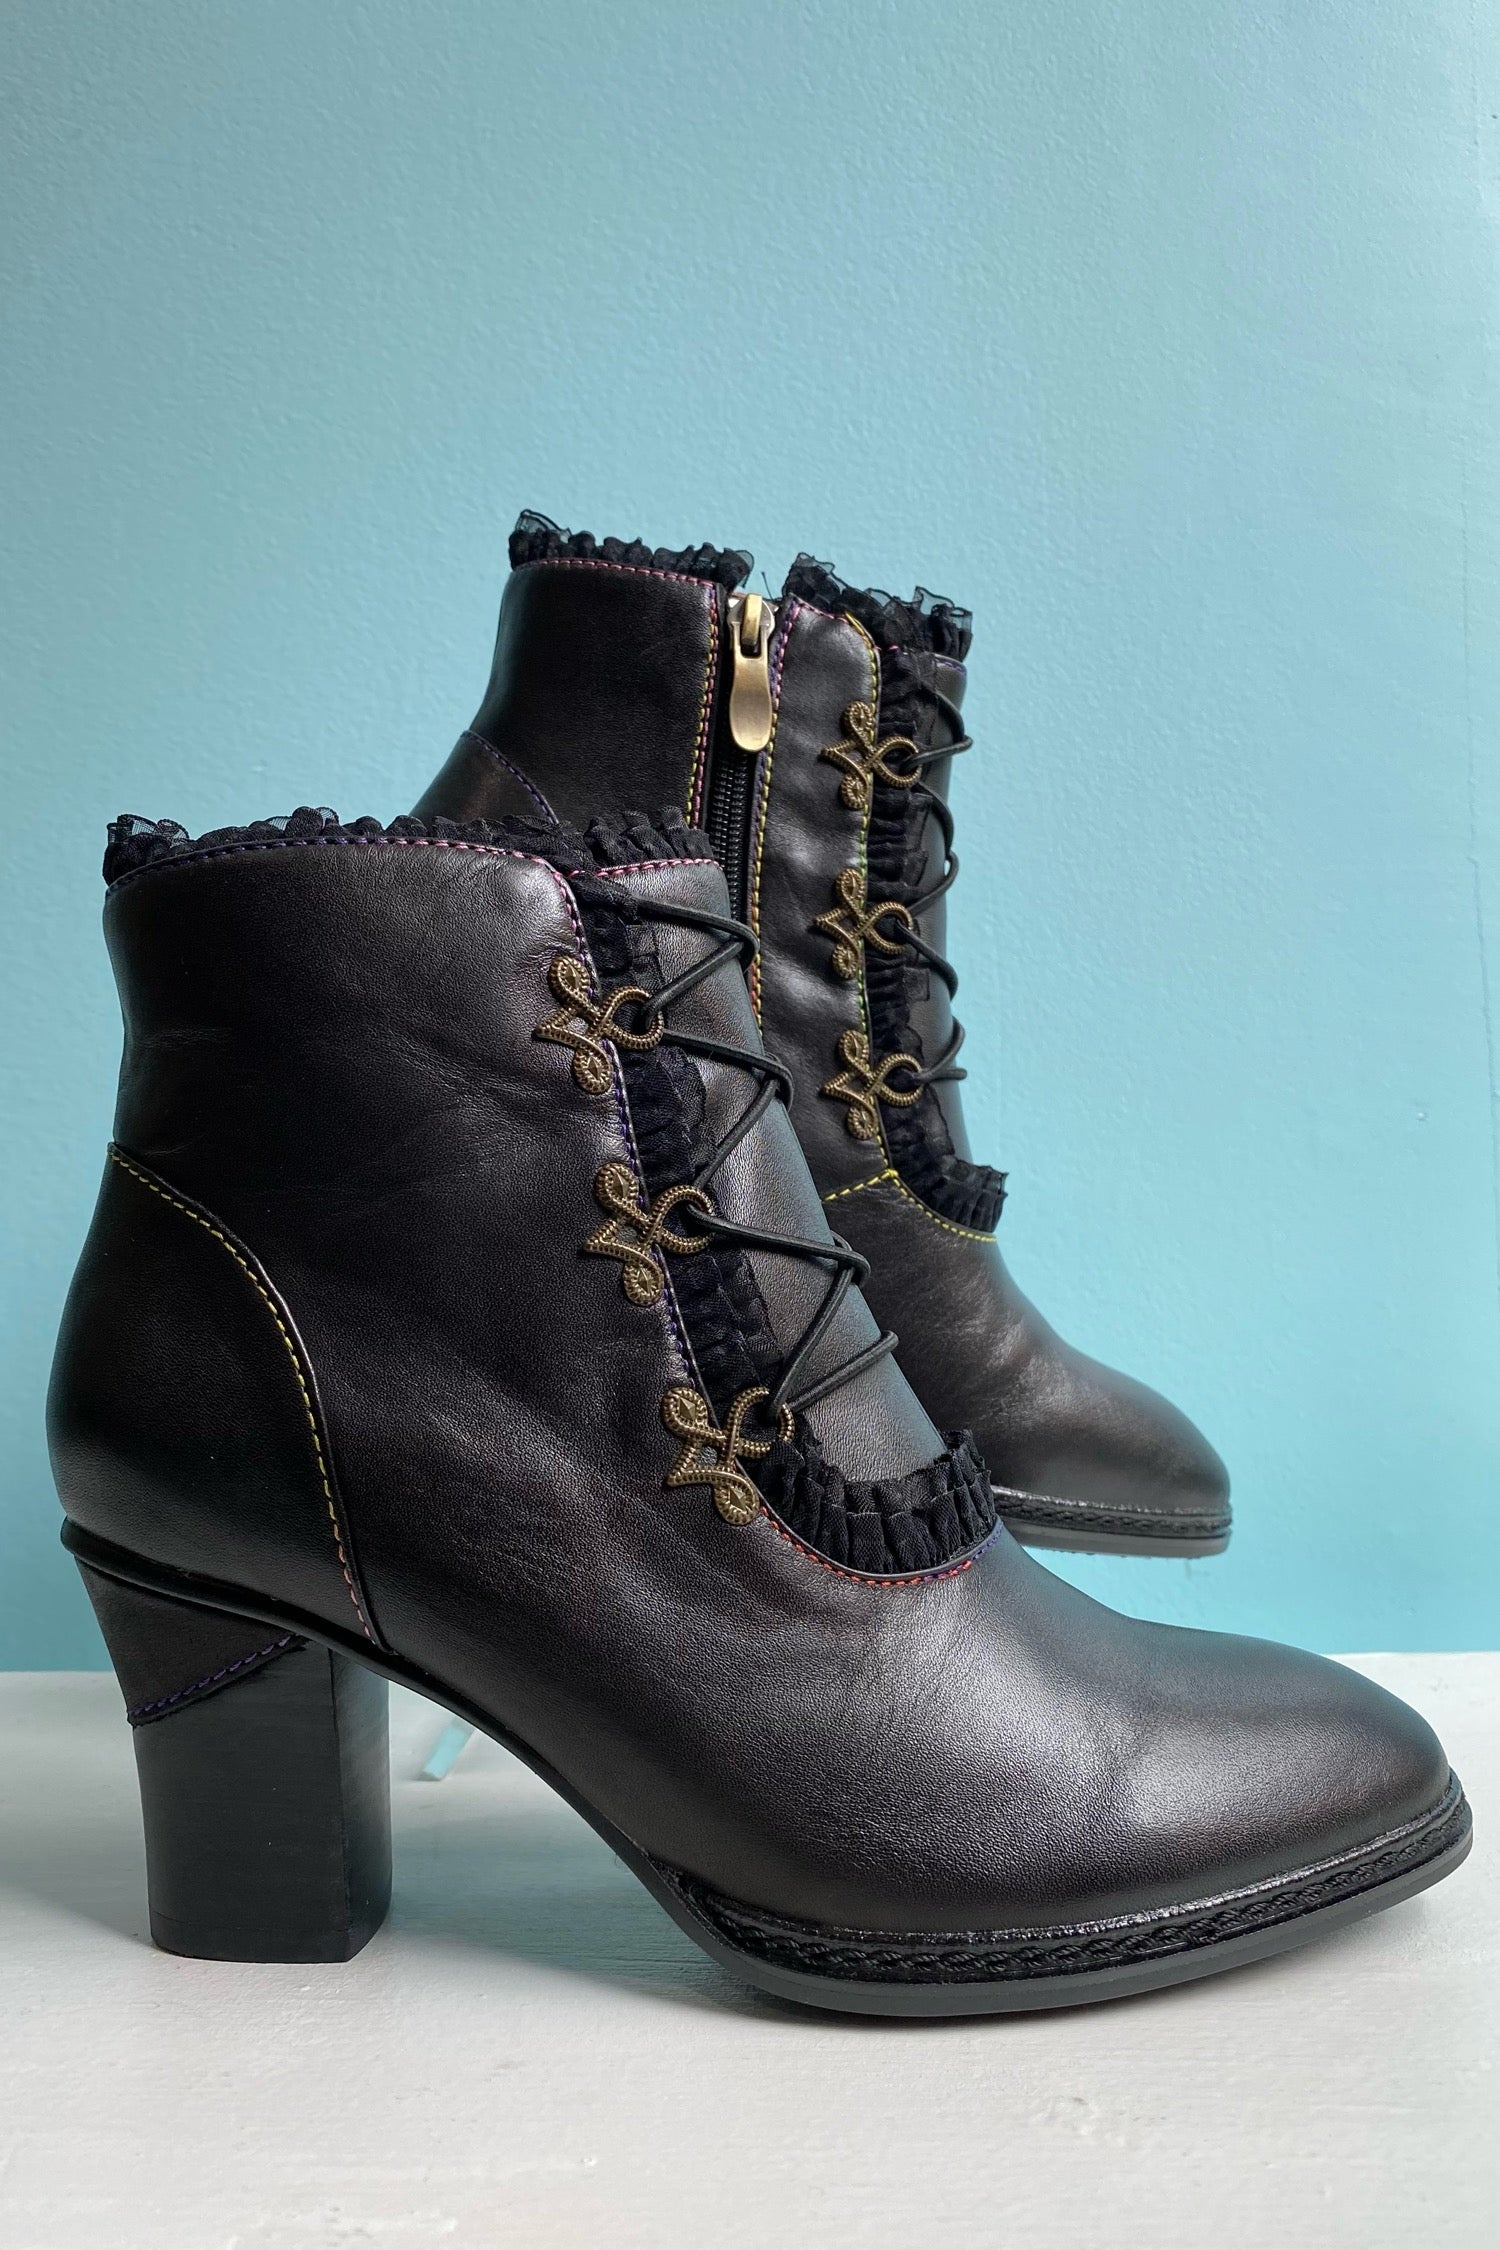 Black Ankle Boots by Chelsea Crew – Millie